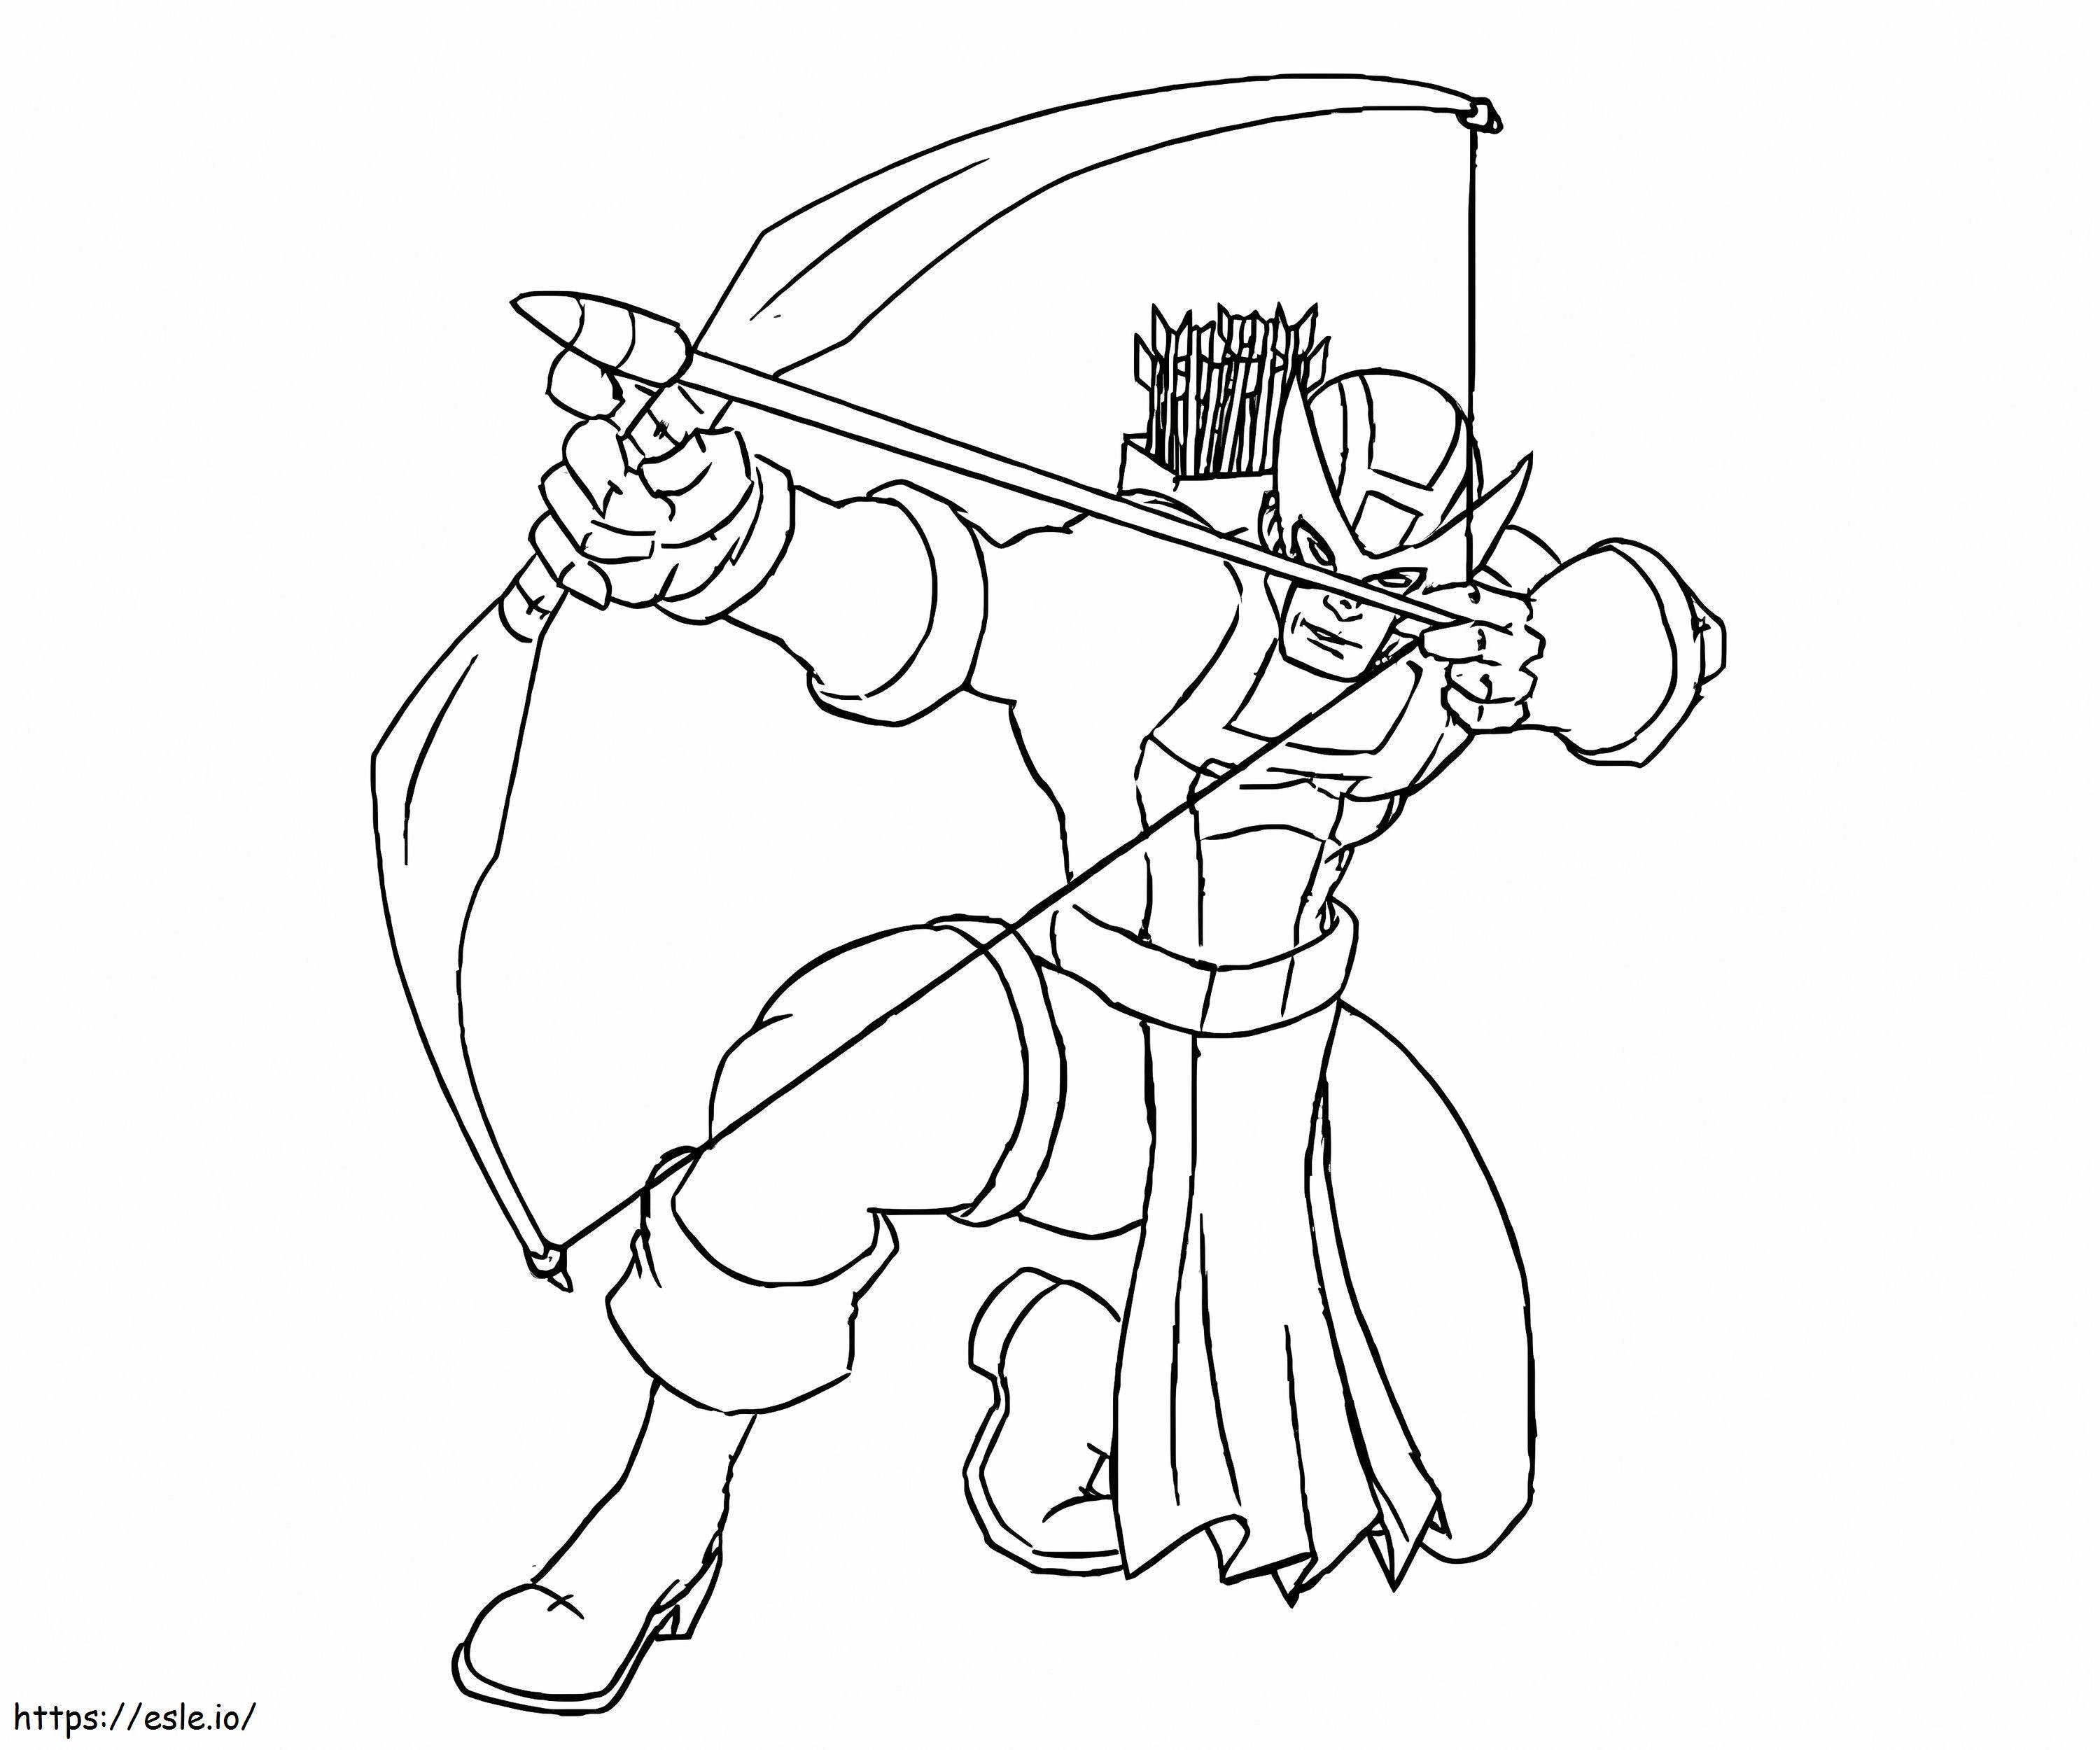 Free Hawkeye coloring page